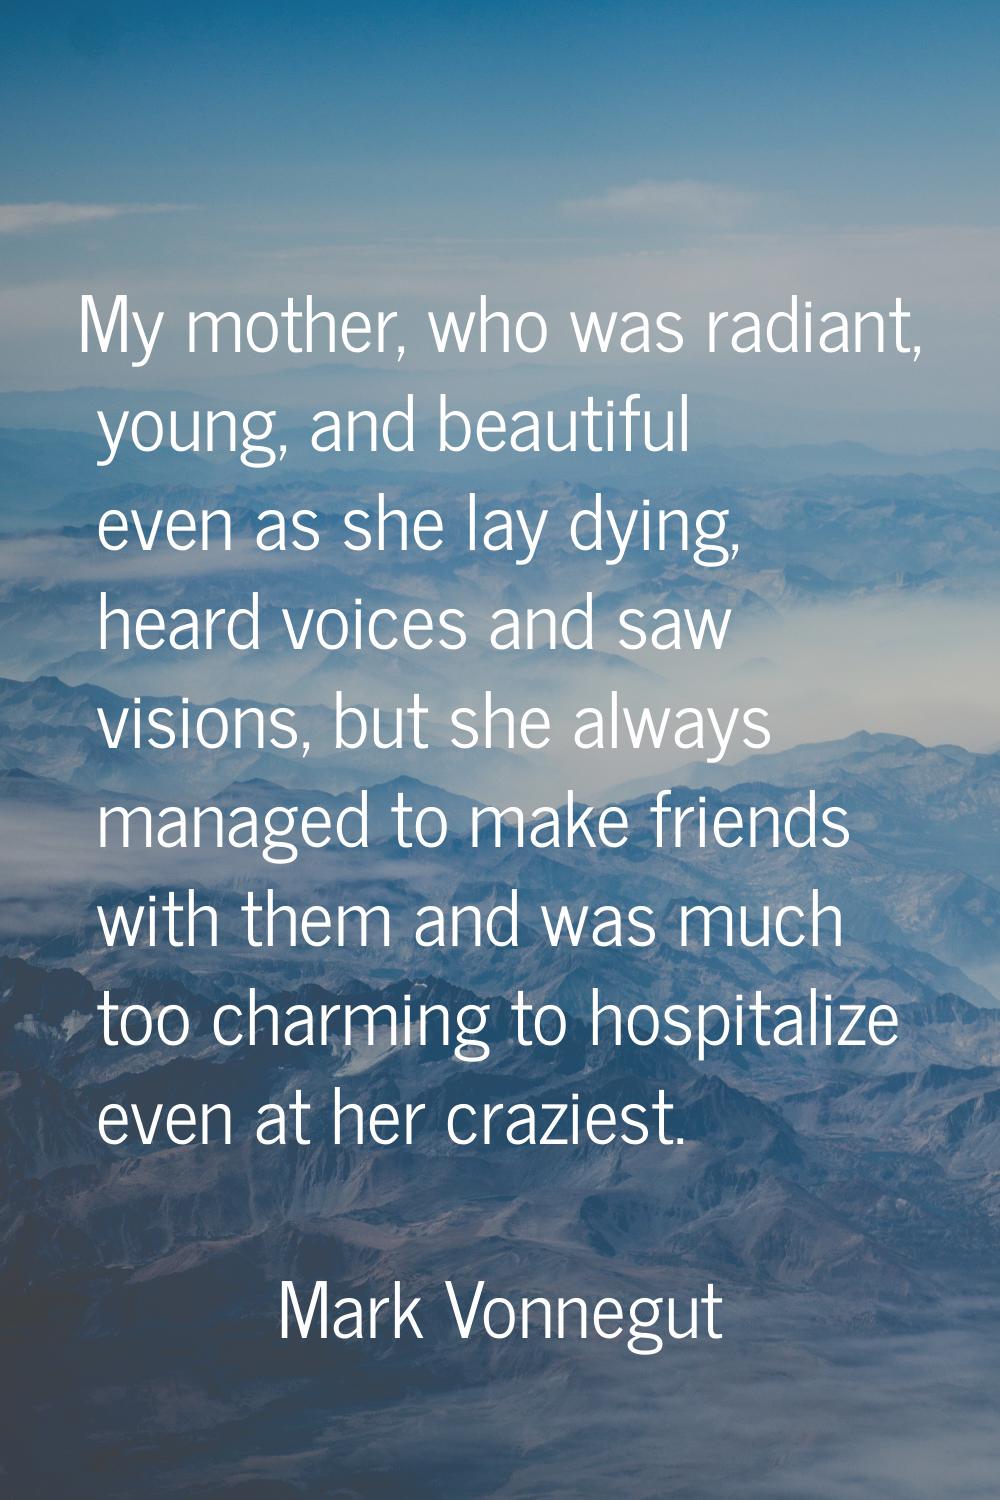 My mother, who was radiant, young, and beautiful even as she lay dying, heard voices and saw vision